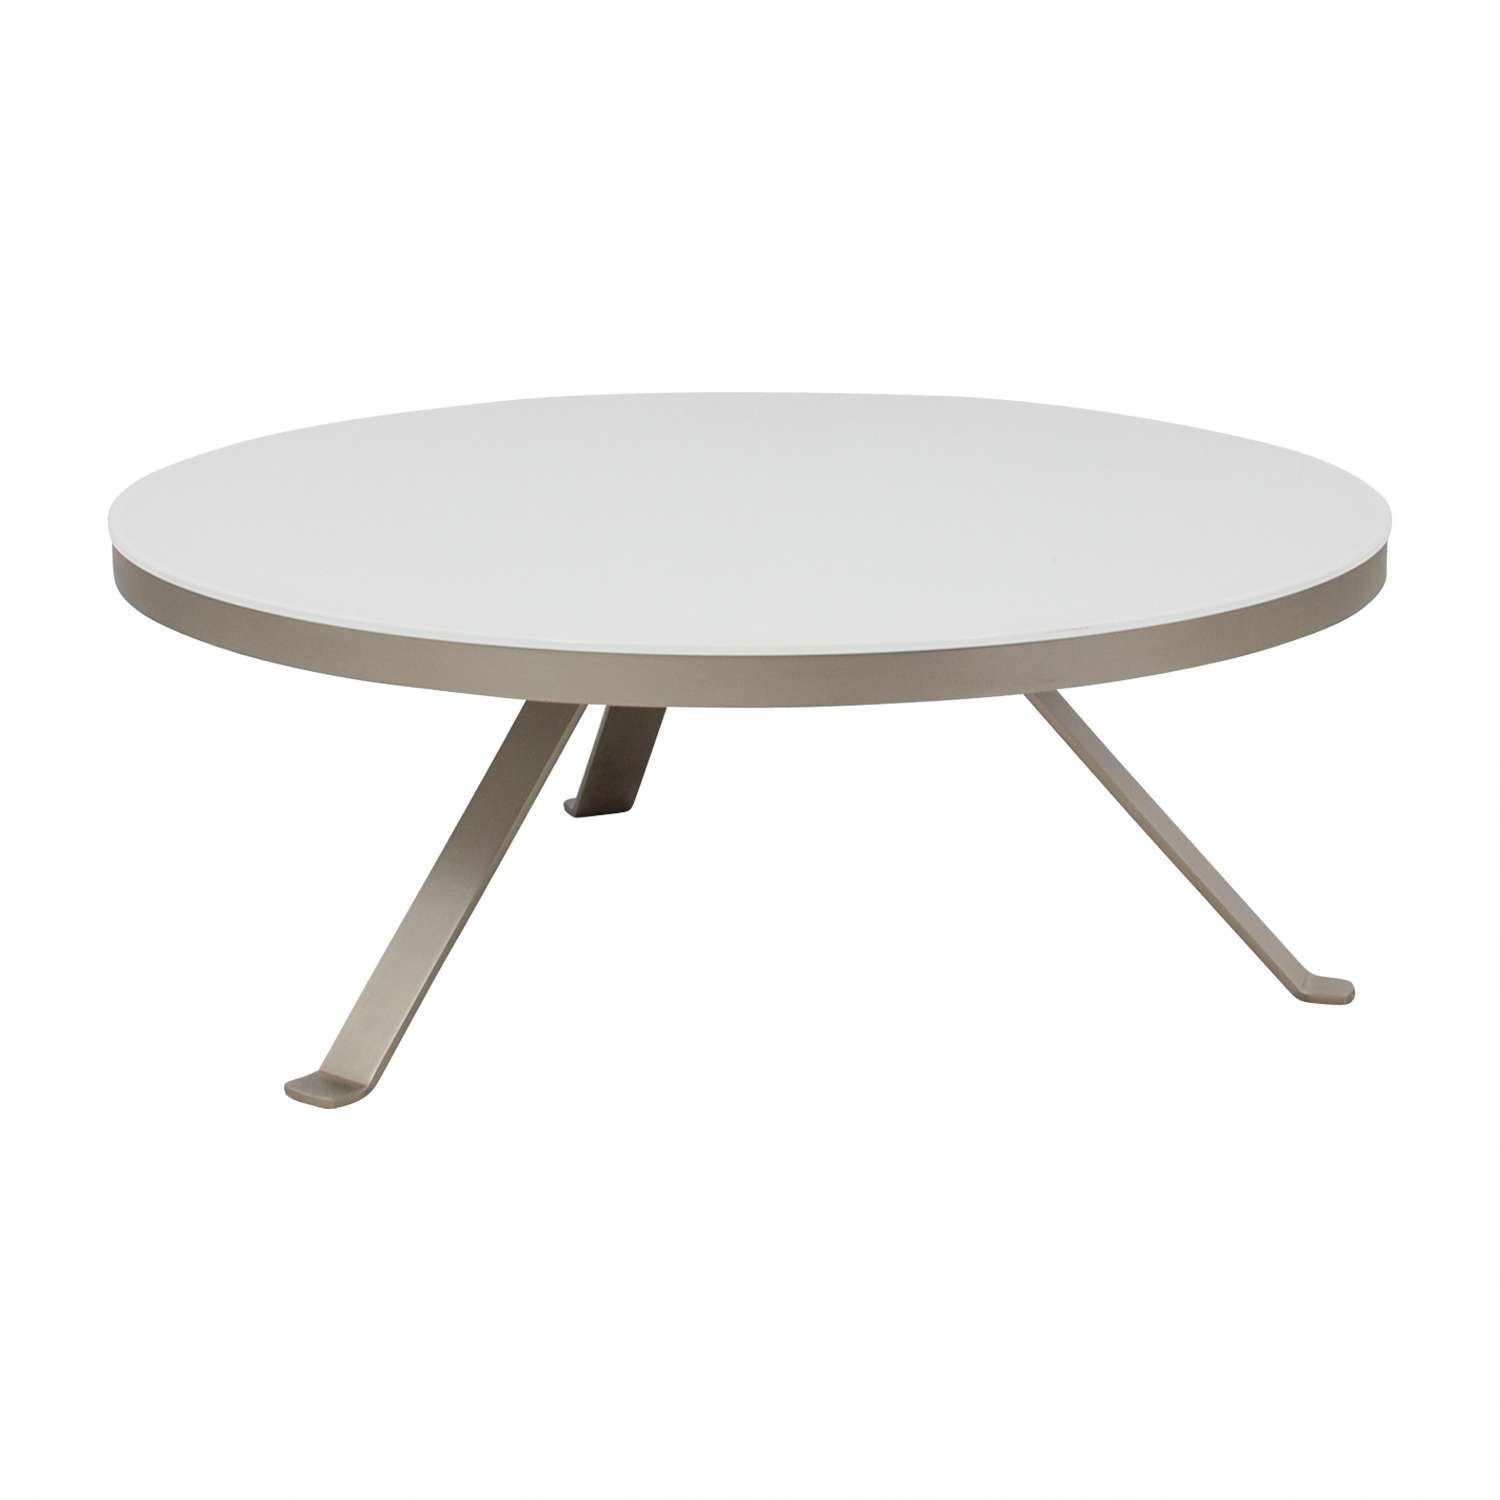 [%2017 White Circle Coffee Tables Inside 76% Off – Bo Concept Bo Concept White Round Coffee Table / Tables|76% Off – Bo Concept Bo Concept White Round Coffee Table / Tables Regarding Popular White Circle Coffee Tables%] (View 9 of 20)